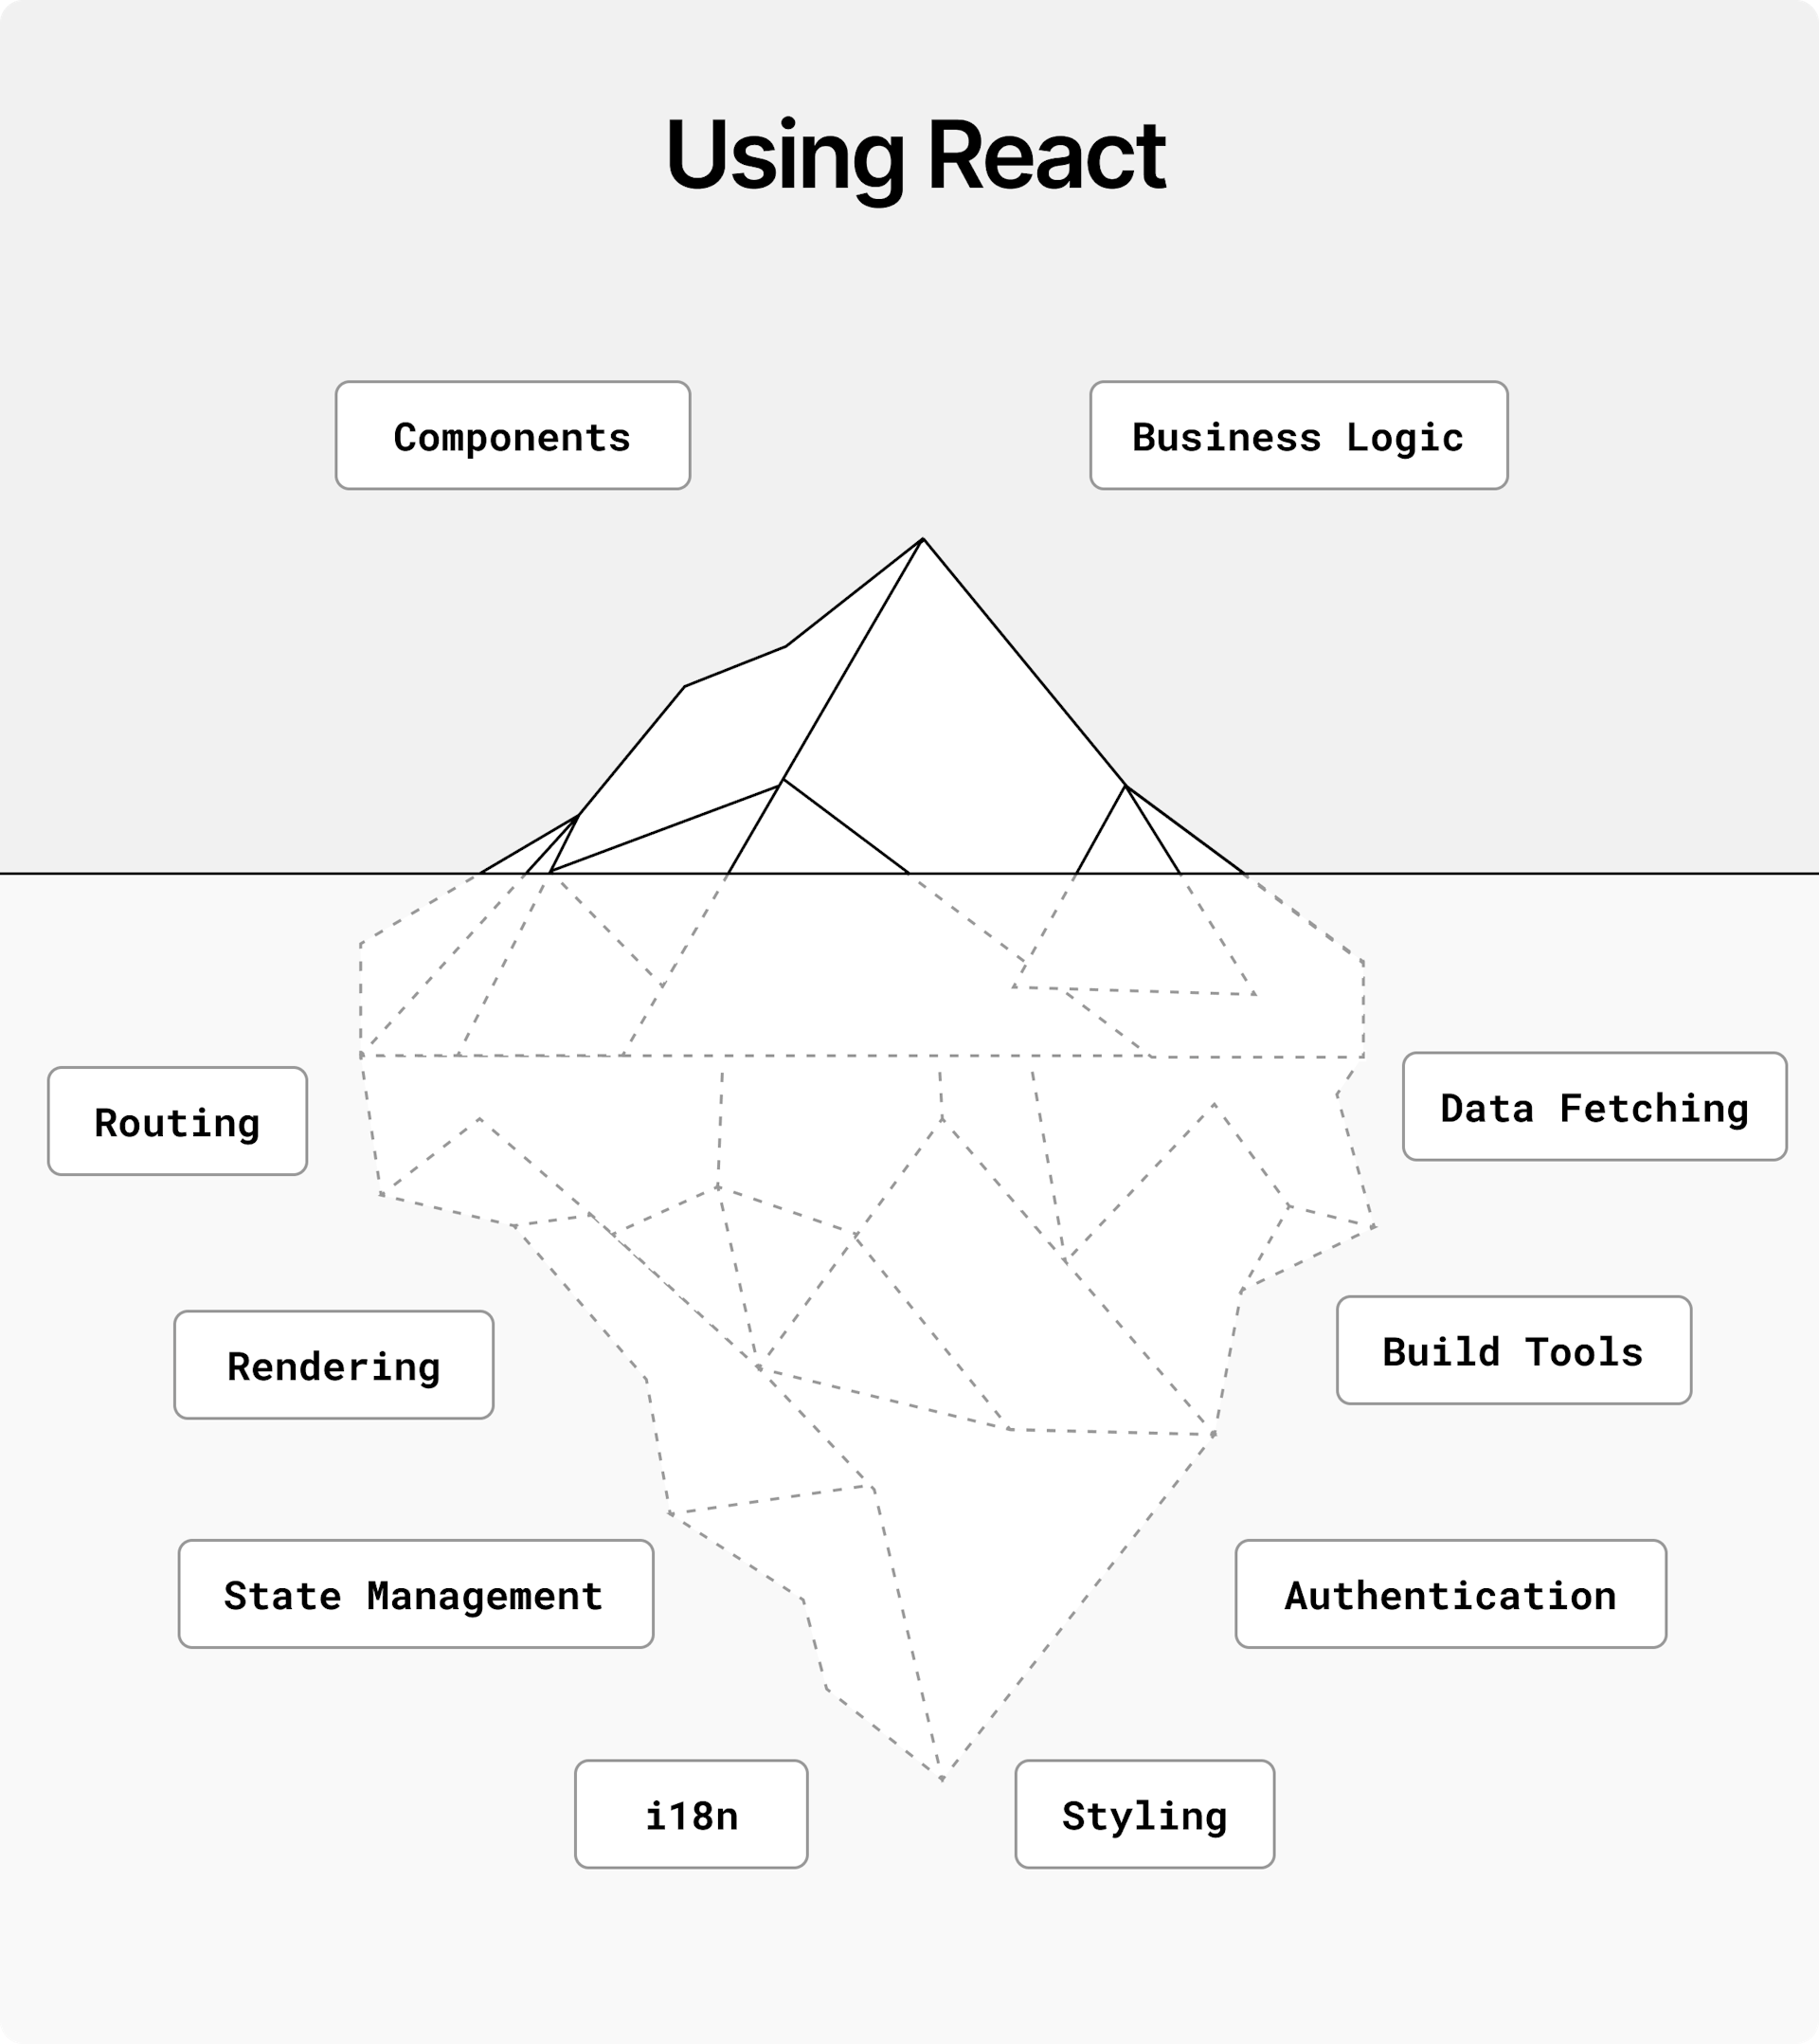 An iceberg of react frameworks, showing that while most of the time it seems it's just components and business logic, the reality is that under water there are many other things frameworks are handling for you, like authentication, rendering, routing, state management, i18n, styling, and more.